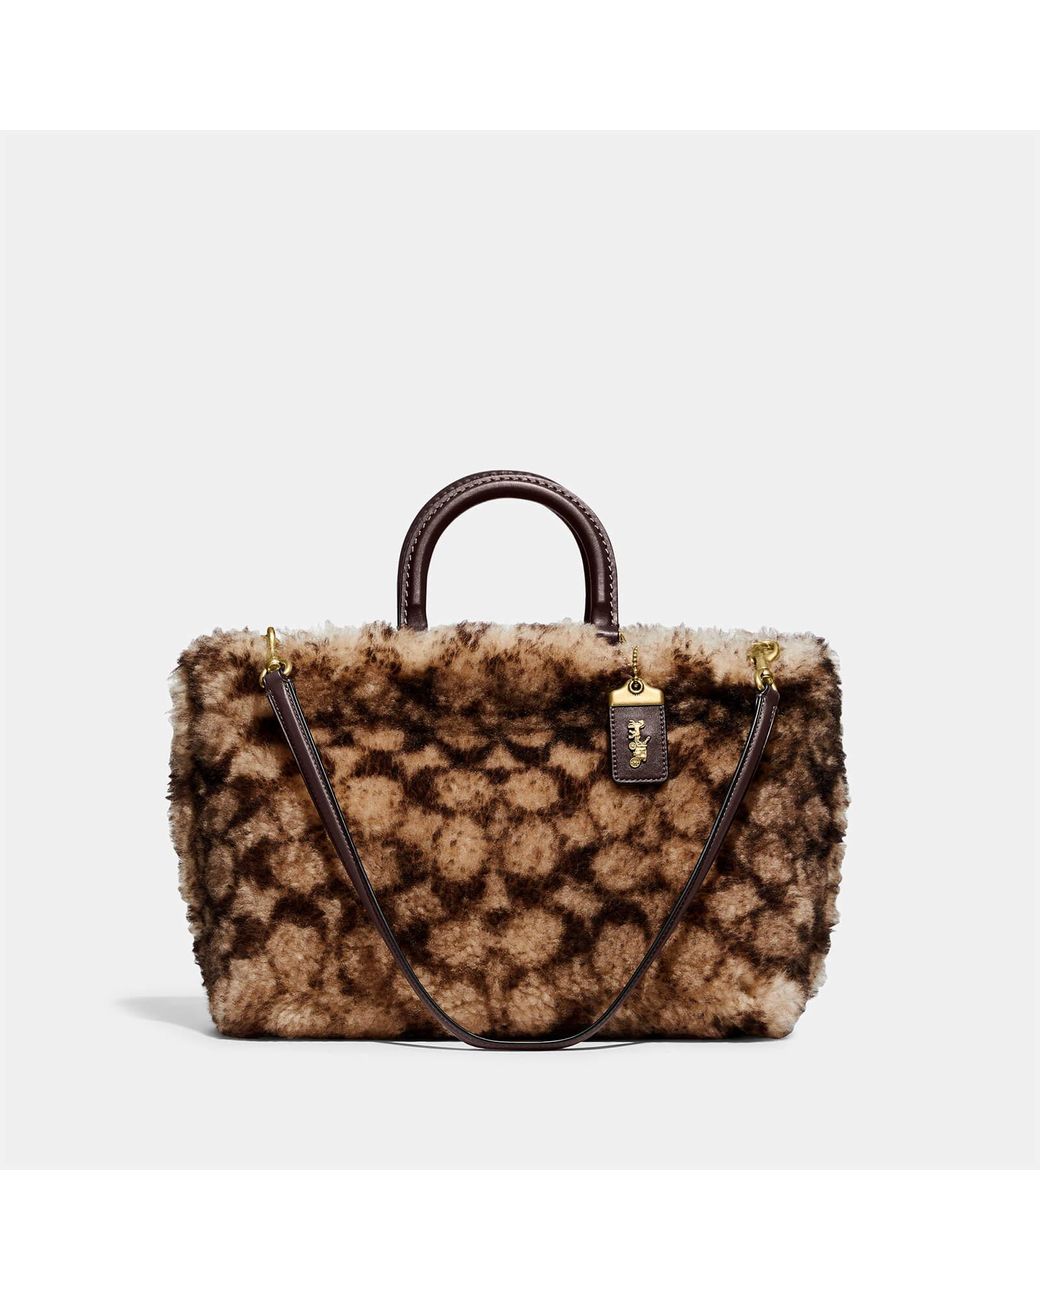 COACH Signature Shearling Rogue Tote Bag in Brown | Lyst